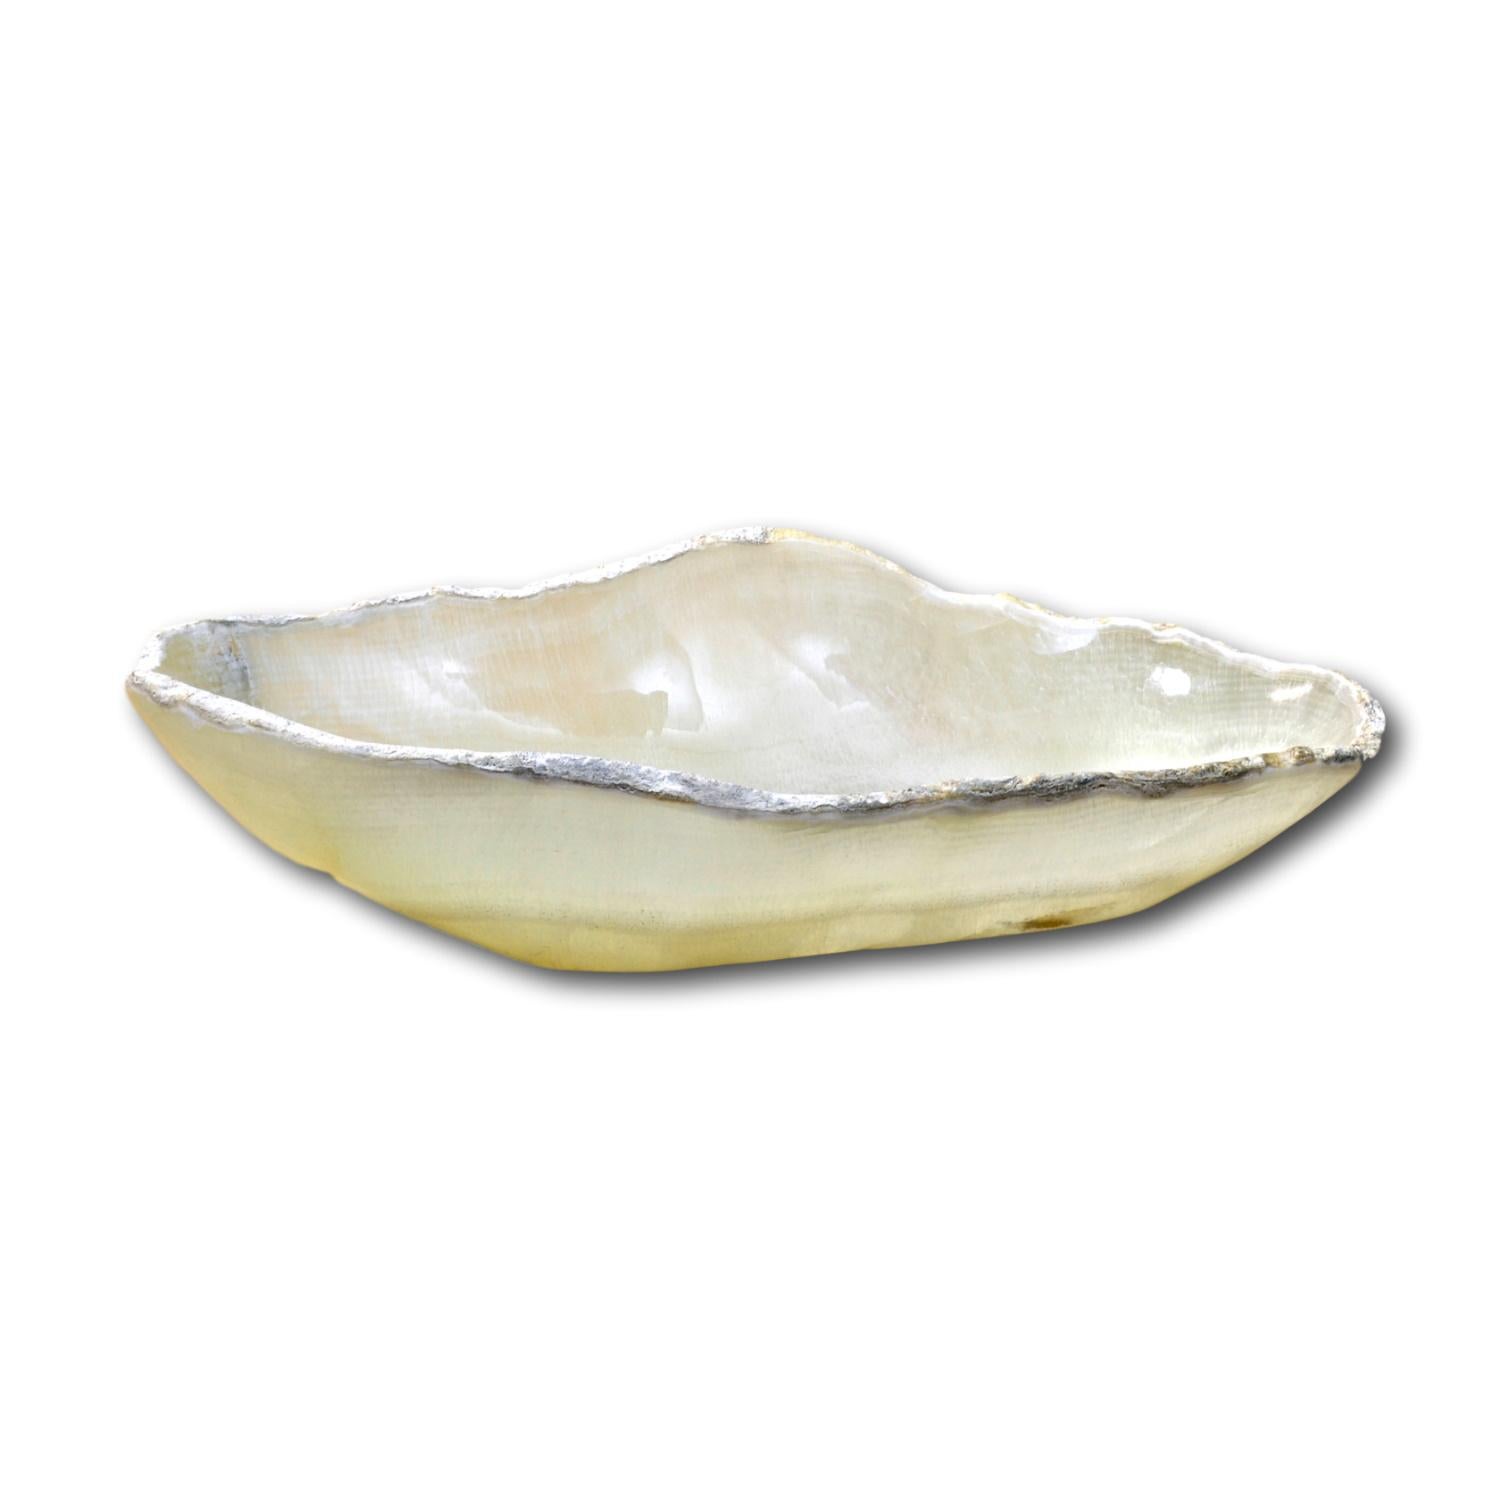 Handcrafted oval onyx bowl, beautifully carved from a single piece of high quality genuine onyx gemstone - each unique onyx stone bowl blends natural onyx shades of green, white, honey, brown and burgundy tones. Richly polished for a high gloss